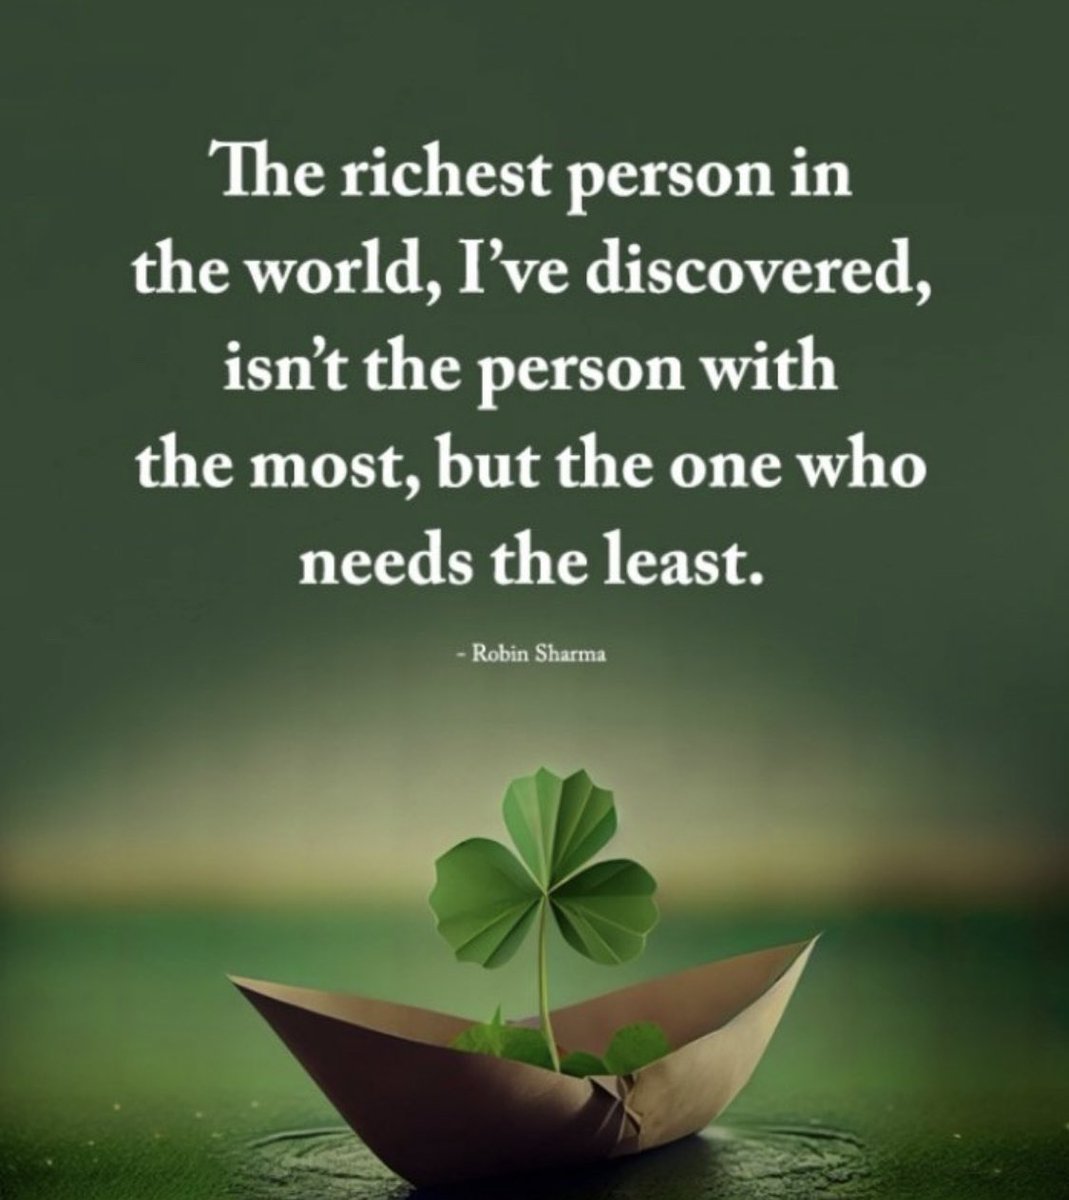 The richest person in the world, I’ve discovered, isn’t the person with the most, but the one who needs the least 

#positive #mentalhealth #mindset #joytrain #successtrain #ThinkBIGSundayWithMarsha #thrivetogether